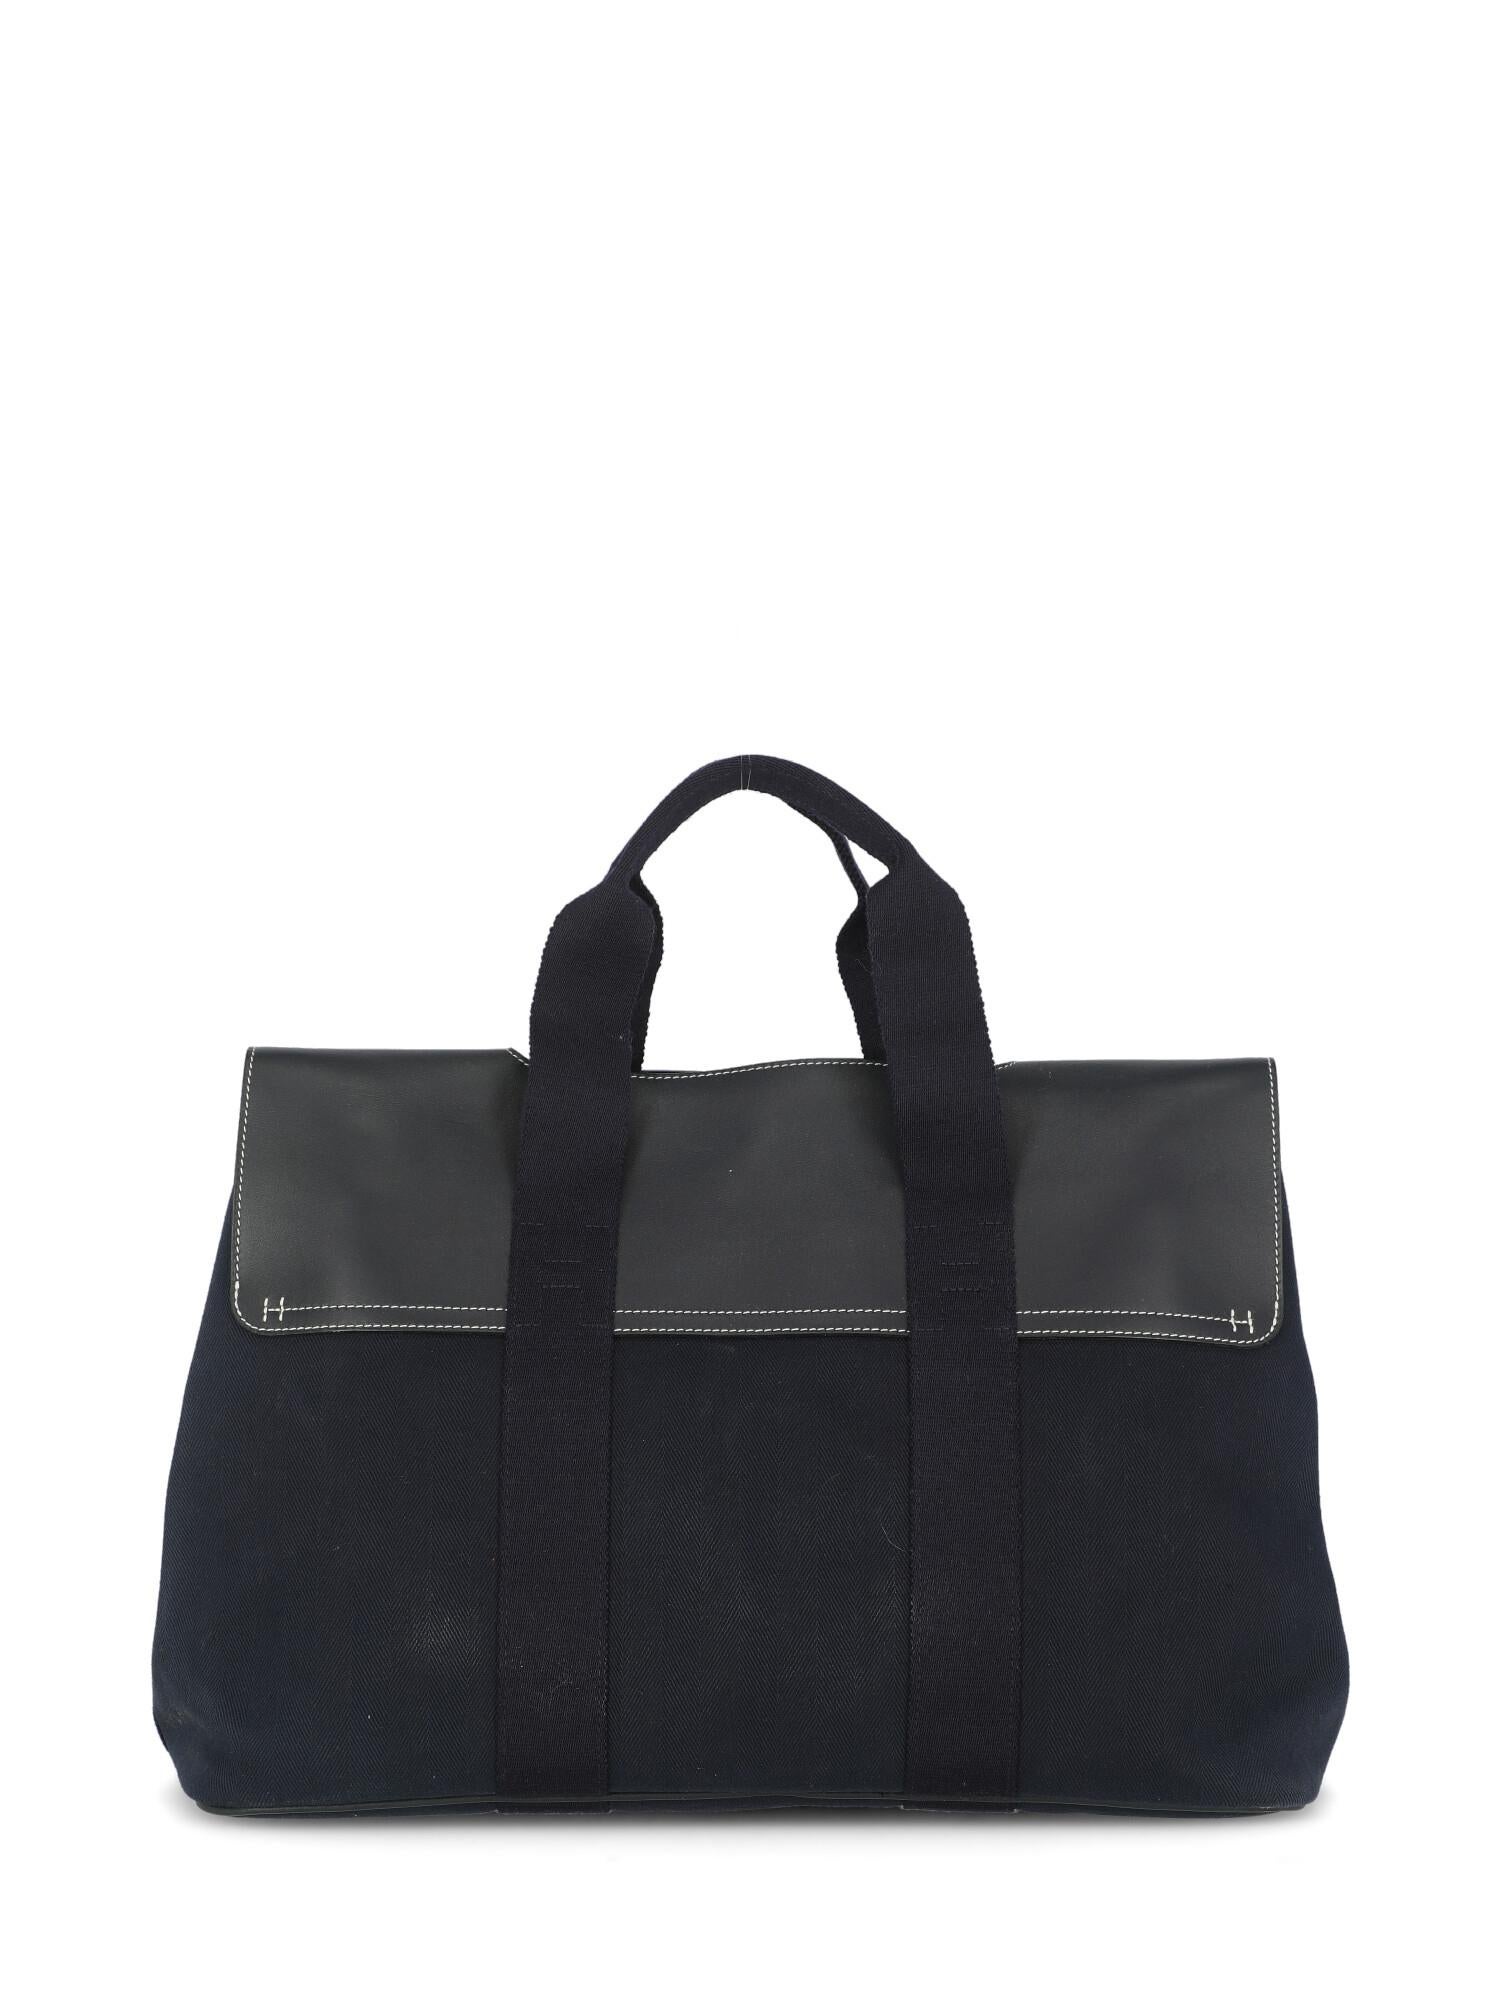 Hermès Woman Handbag  Navy Fabric In Good Condition For Sale In Milan, IT